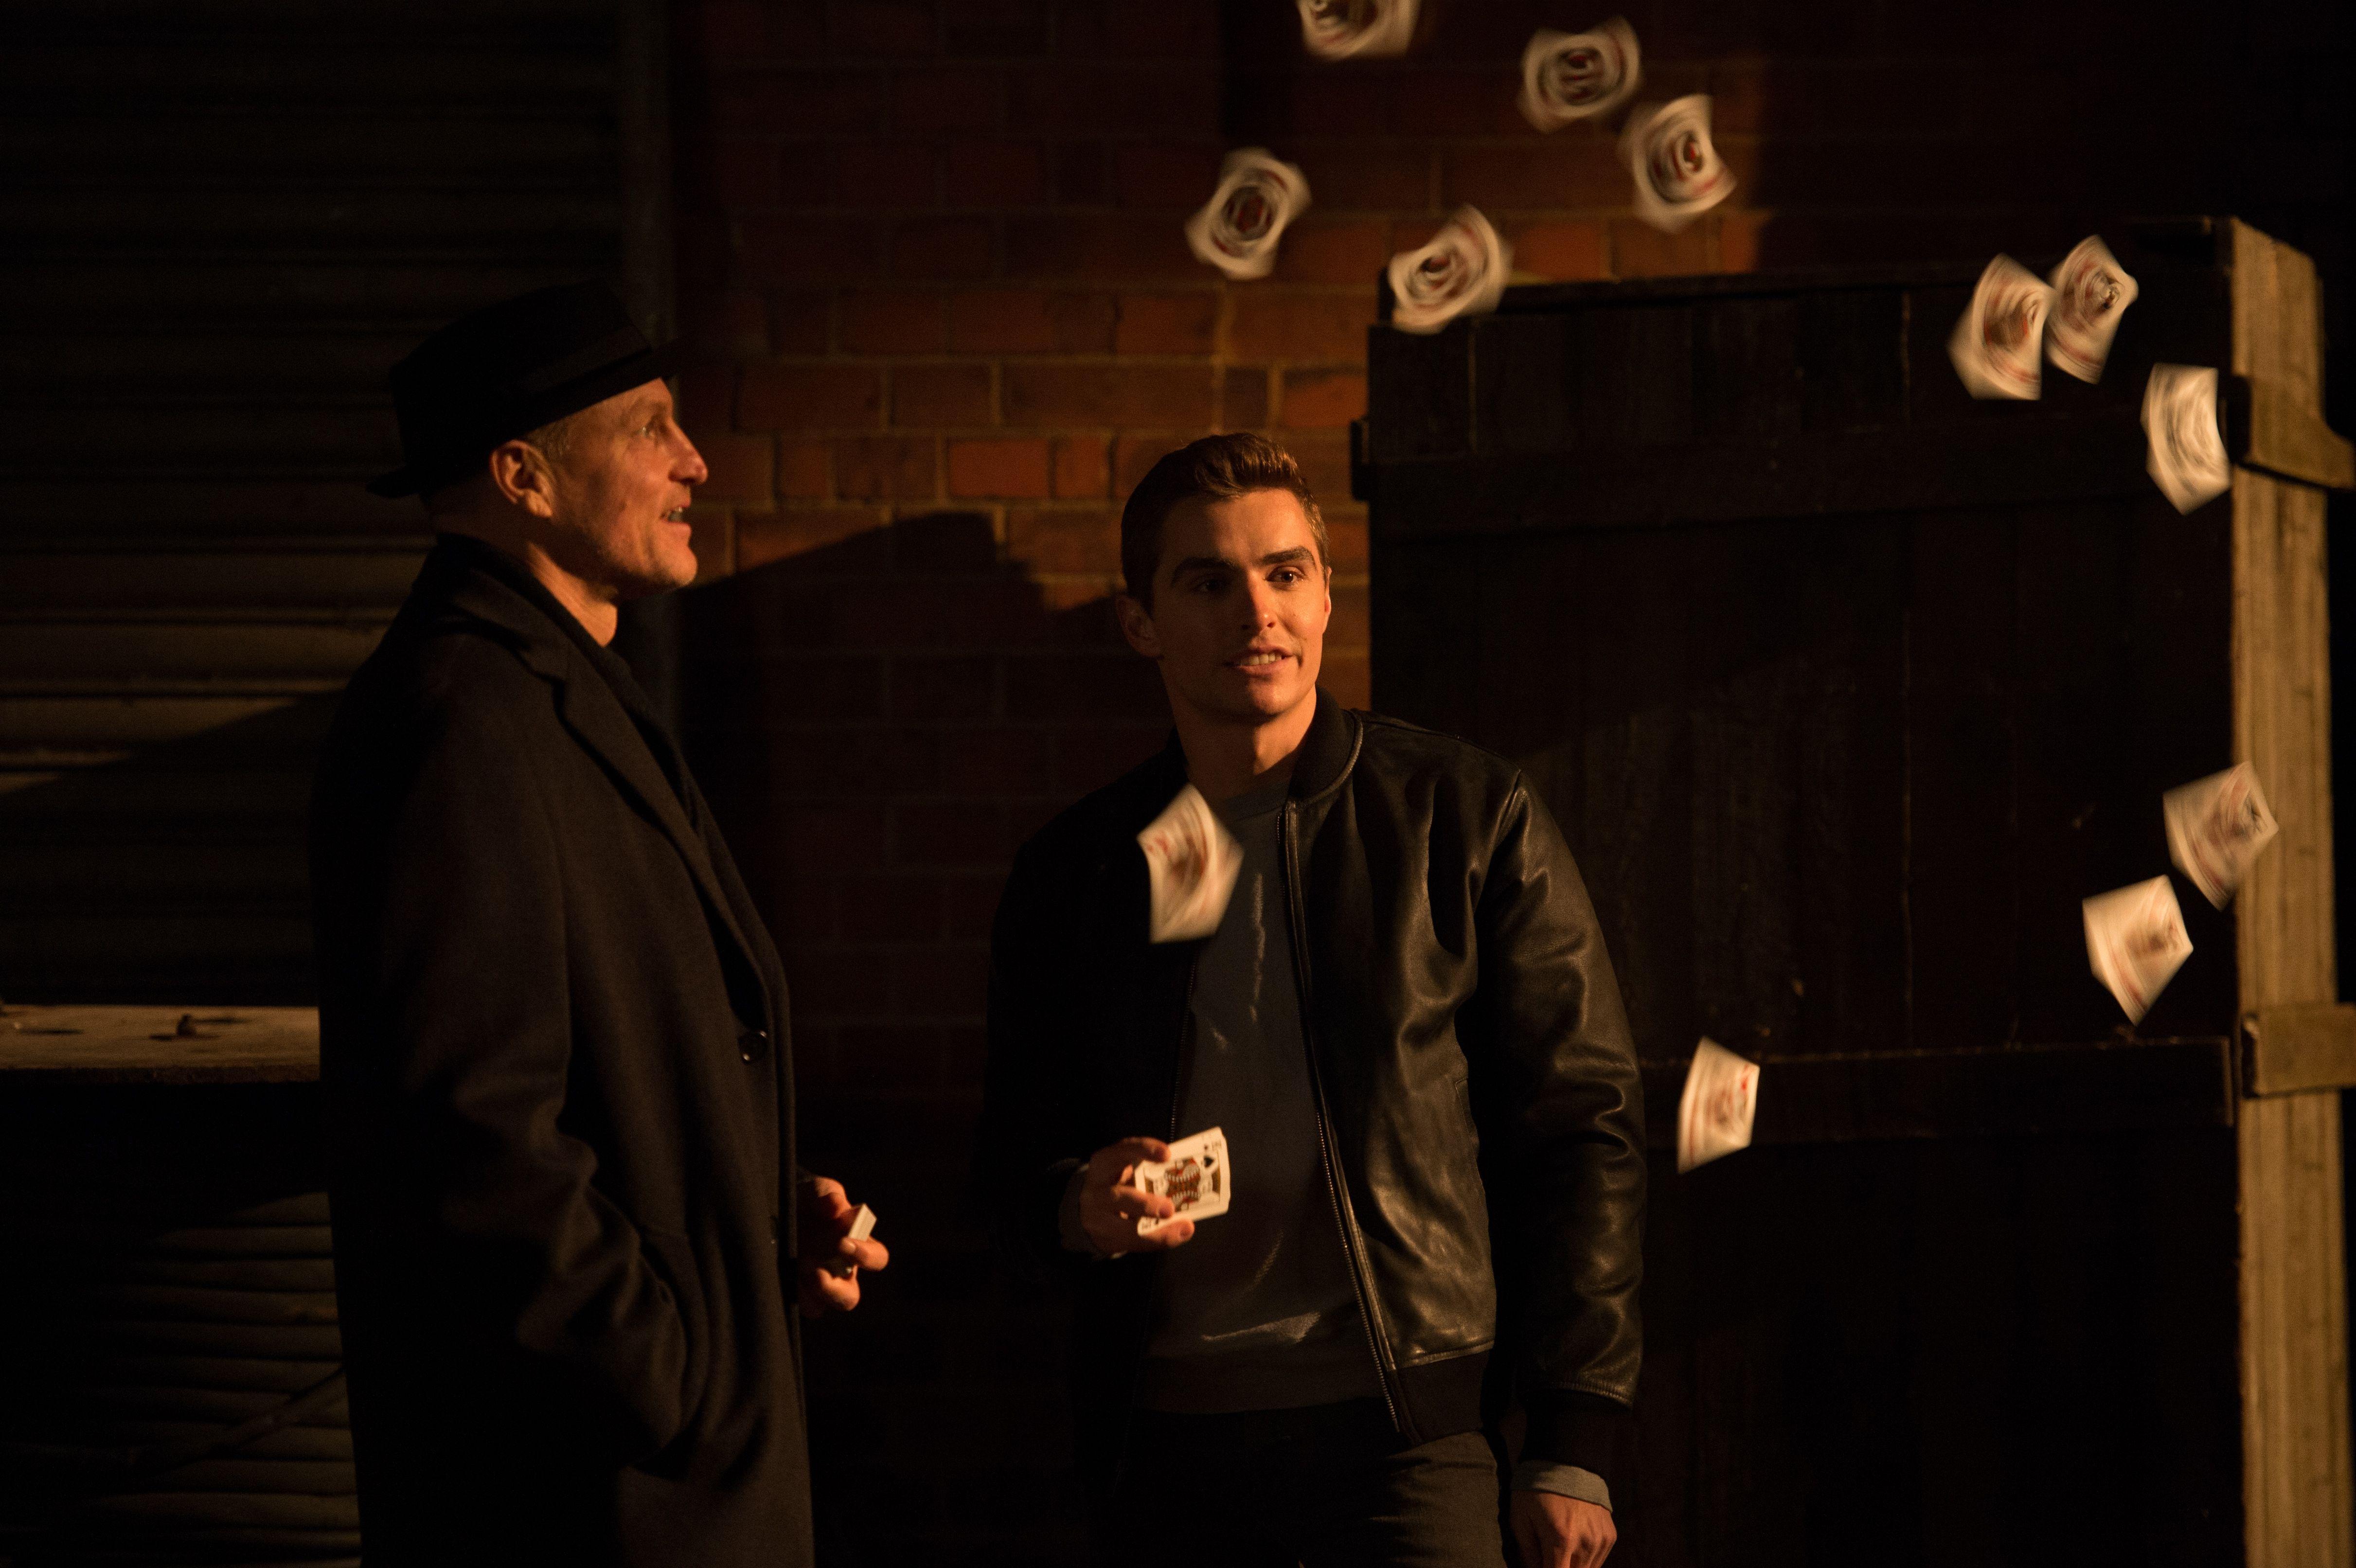 Now You See Me 2 4k Ultra HD Wallpaper